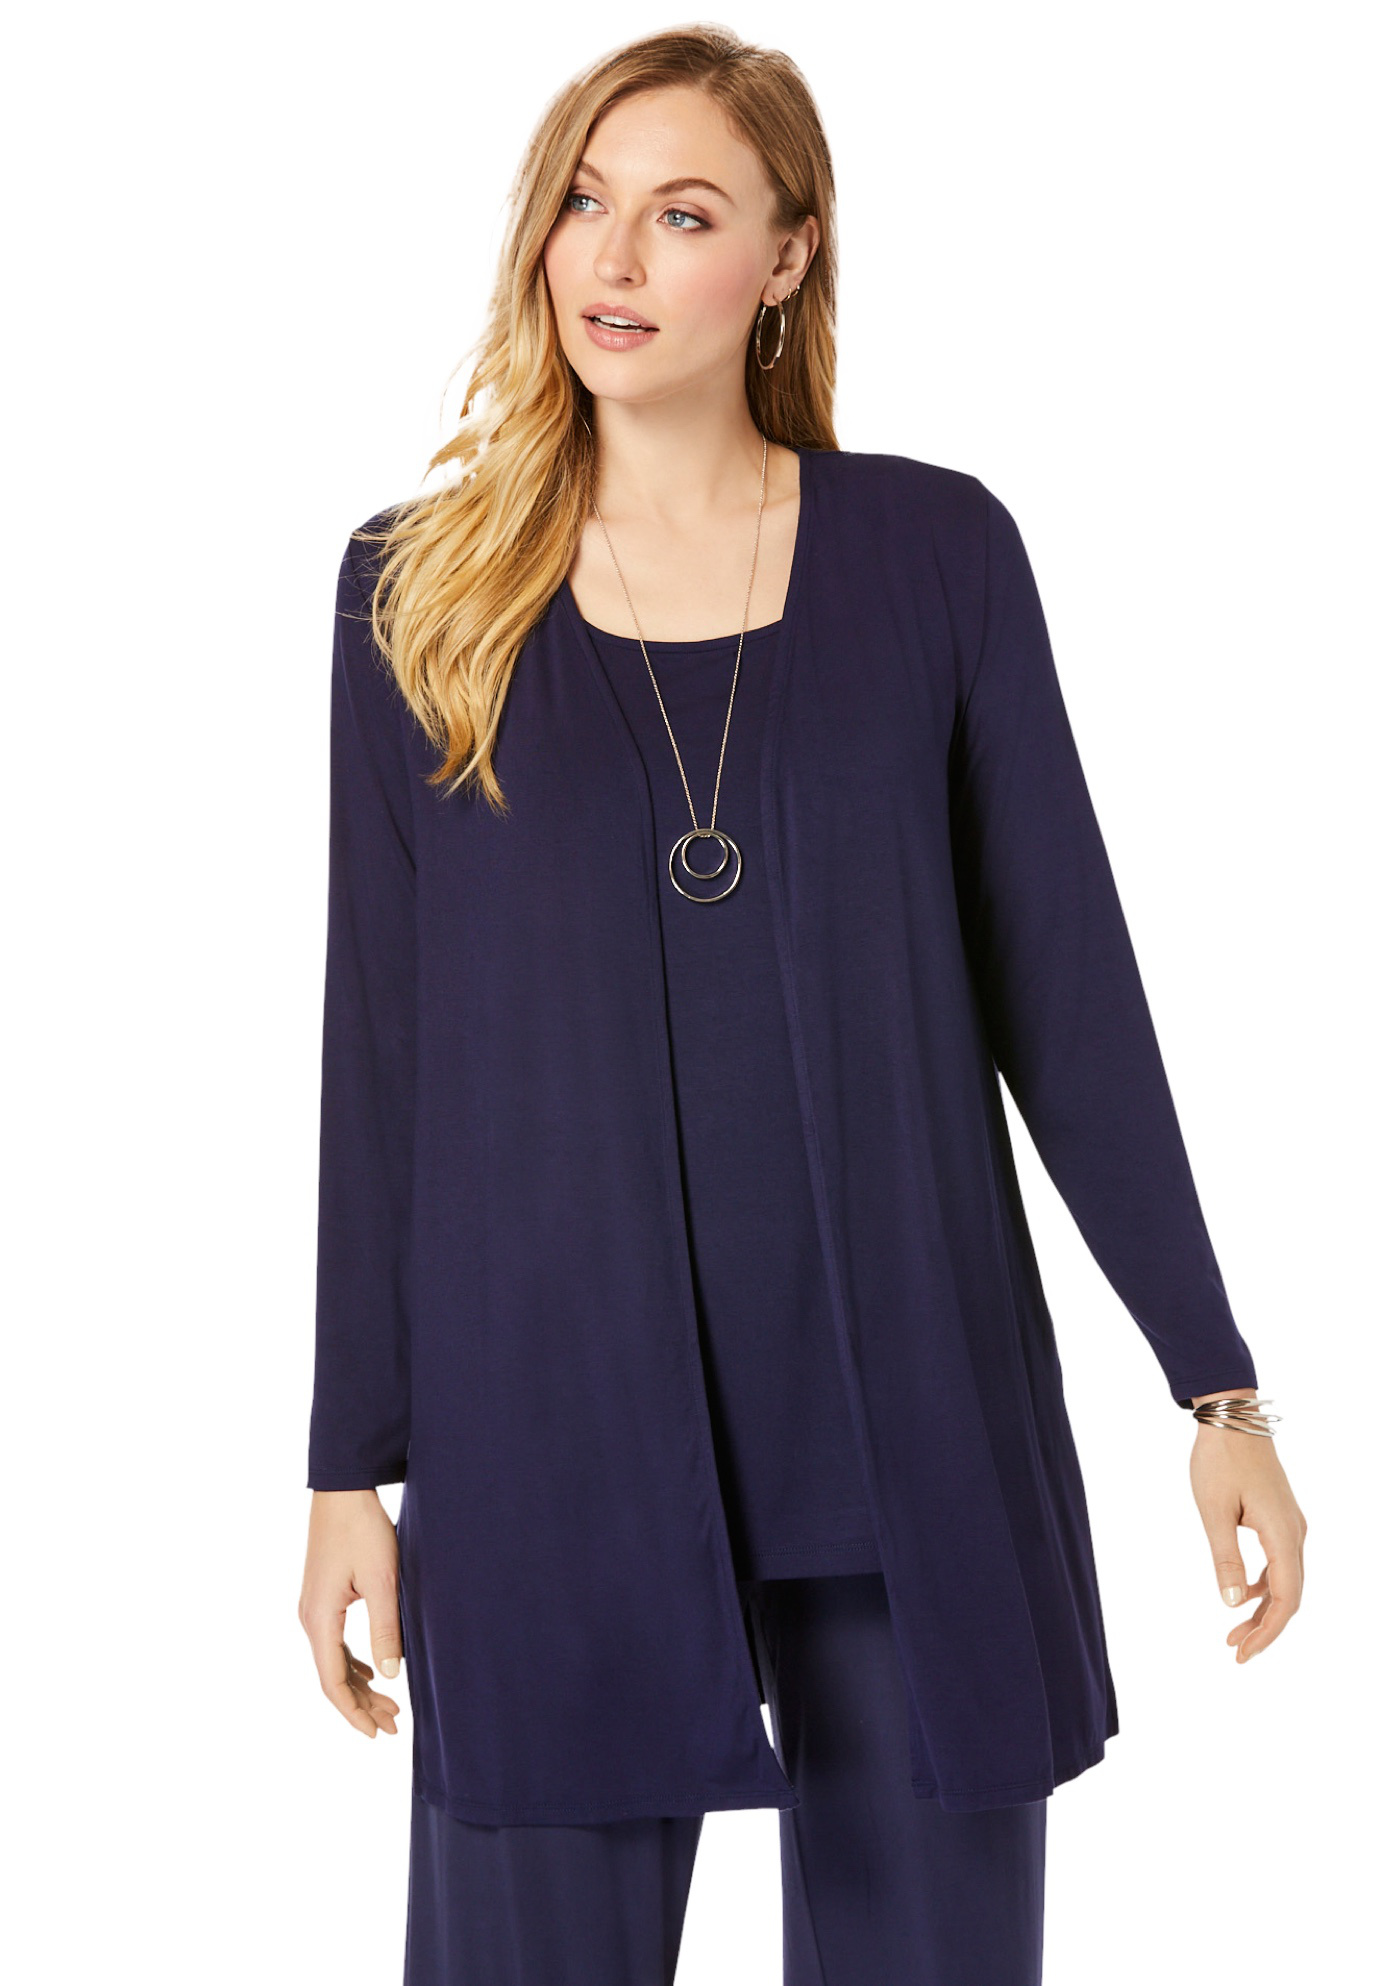 Jessica London Women's Plus Size Everyday Stretch Knit Open Front Cardigan Cardigan - image 1 of 6